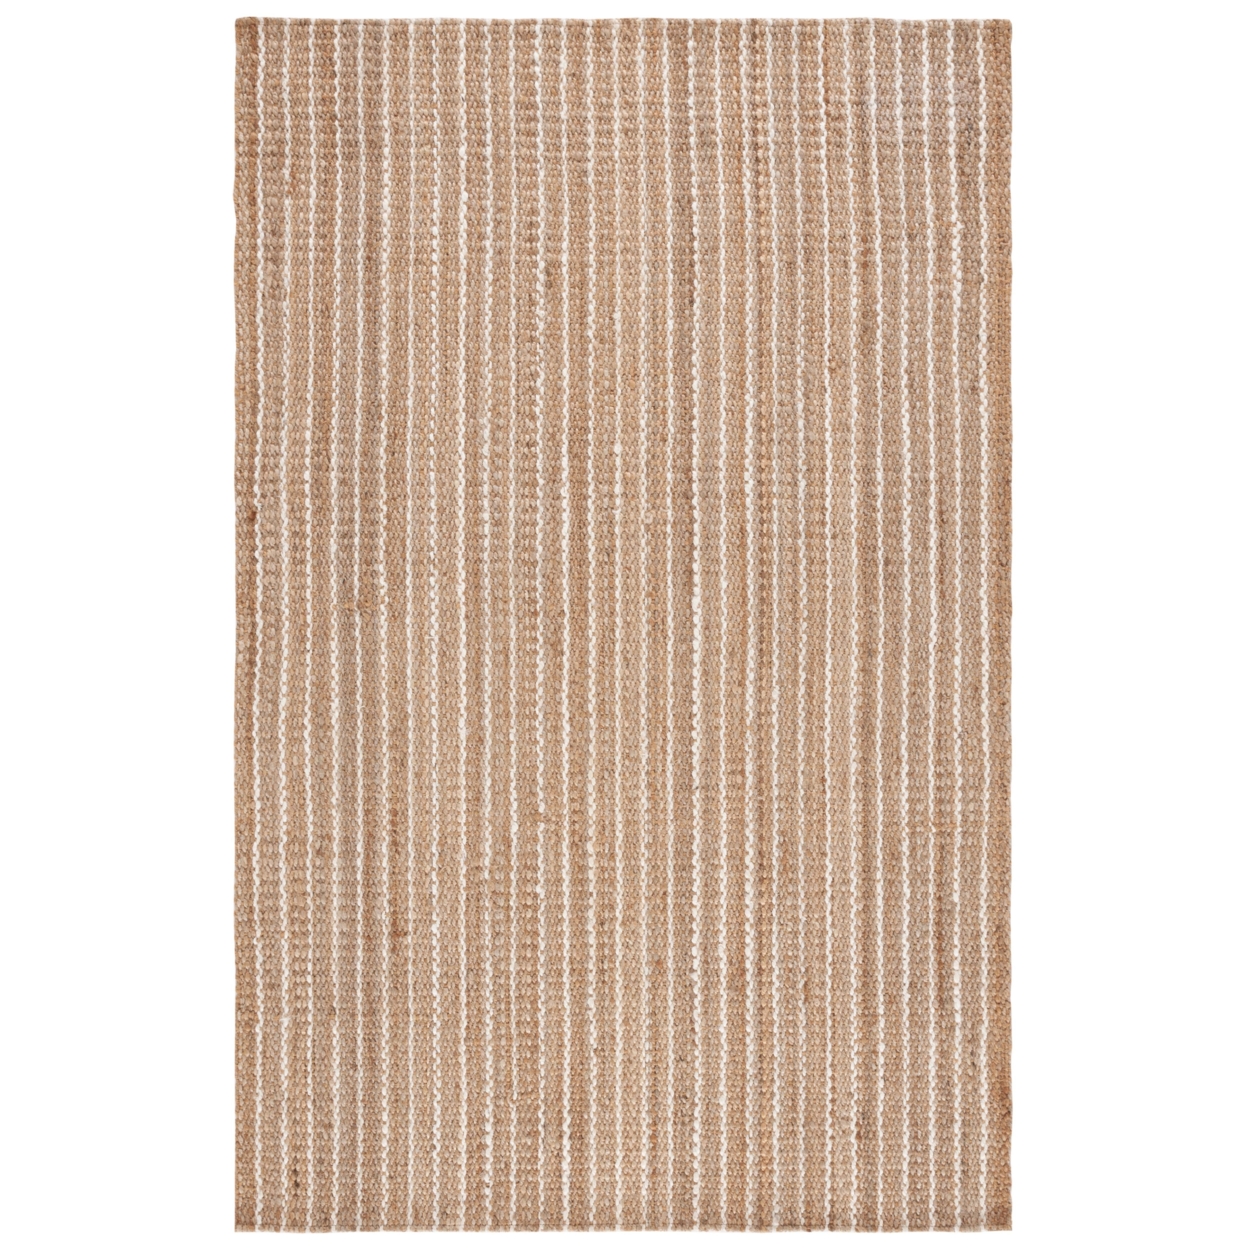 Safavieh NF735A Natural Fiber Natural / Ivory - Rust / Ivory, 7' X 7' Square